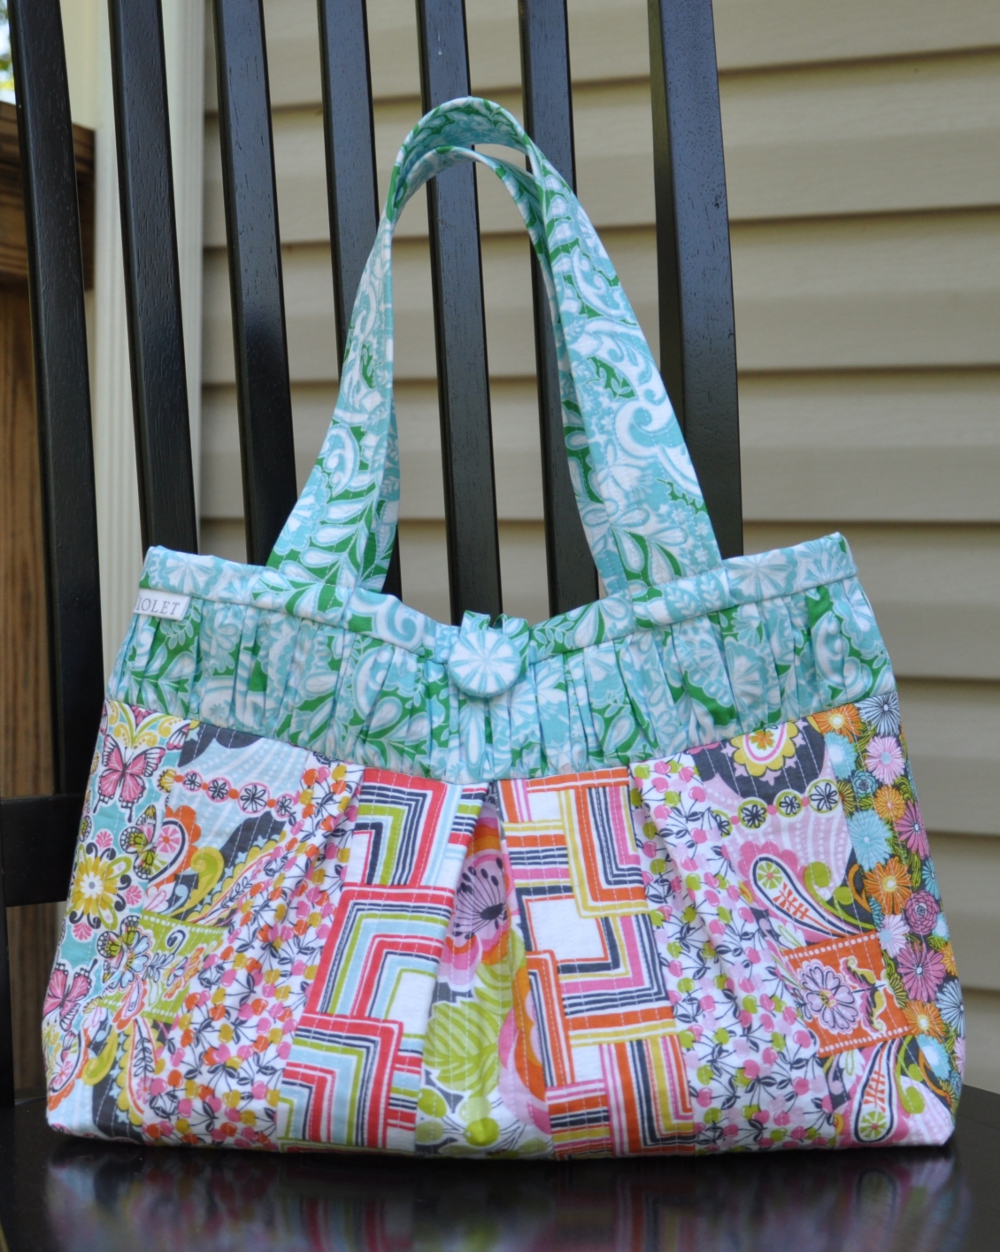 On the Go Bags :: Book Tour - Clover & Violet